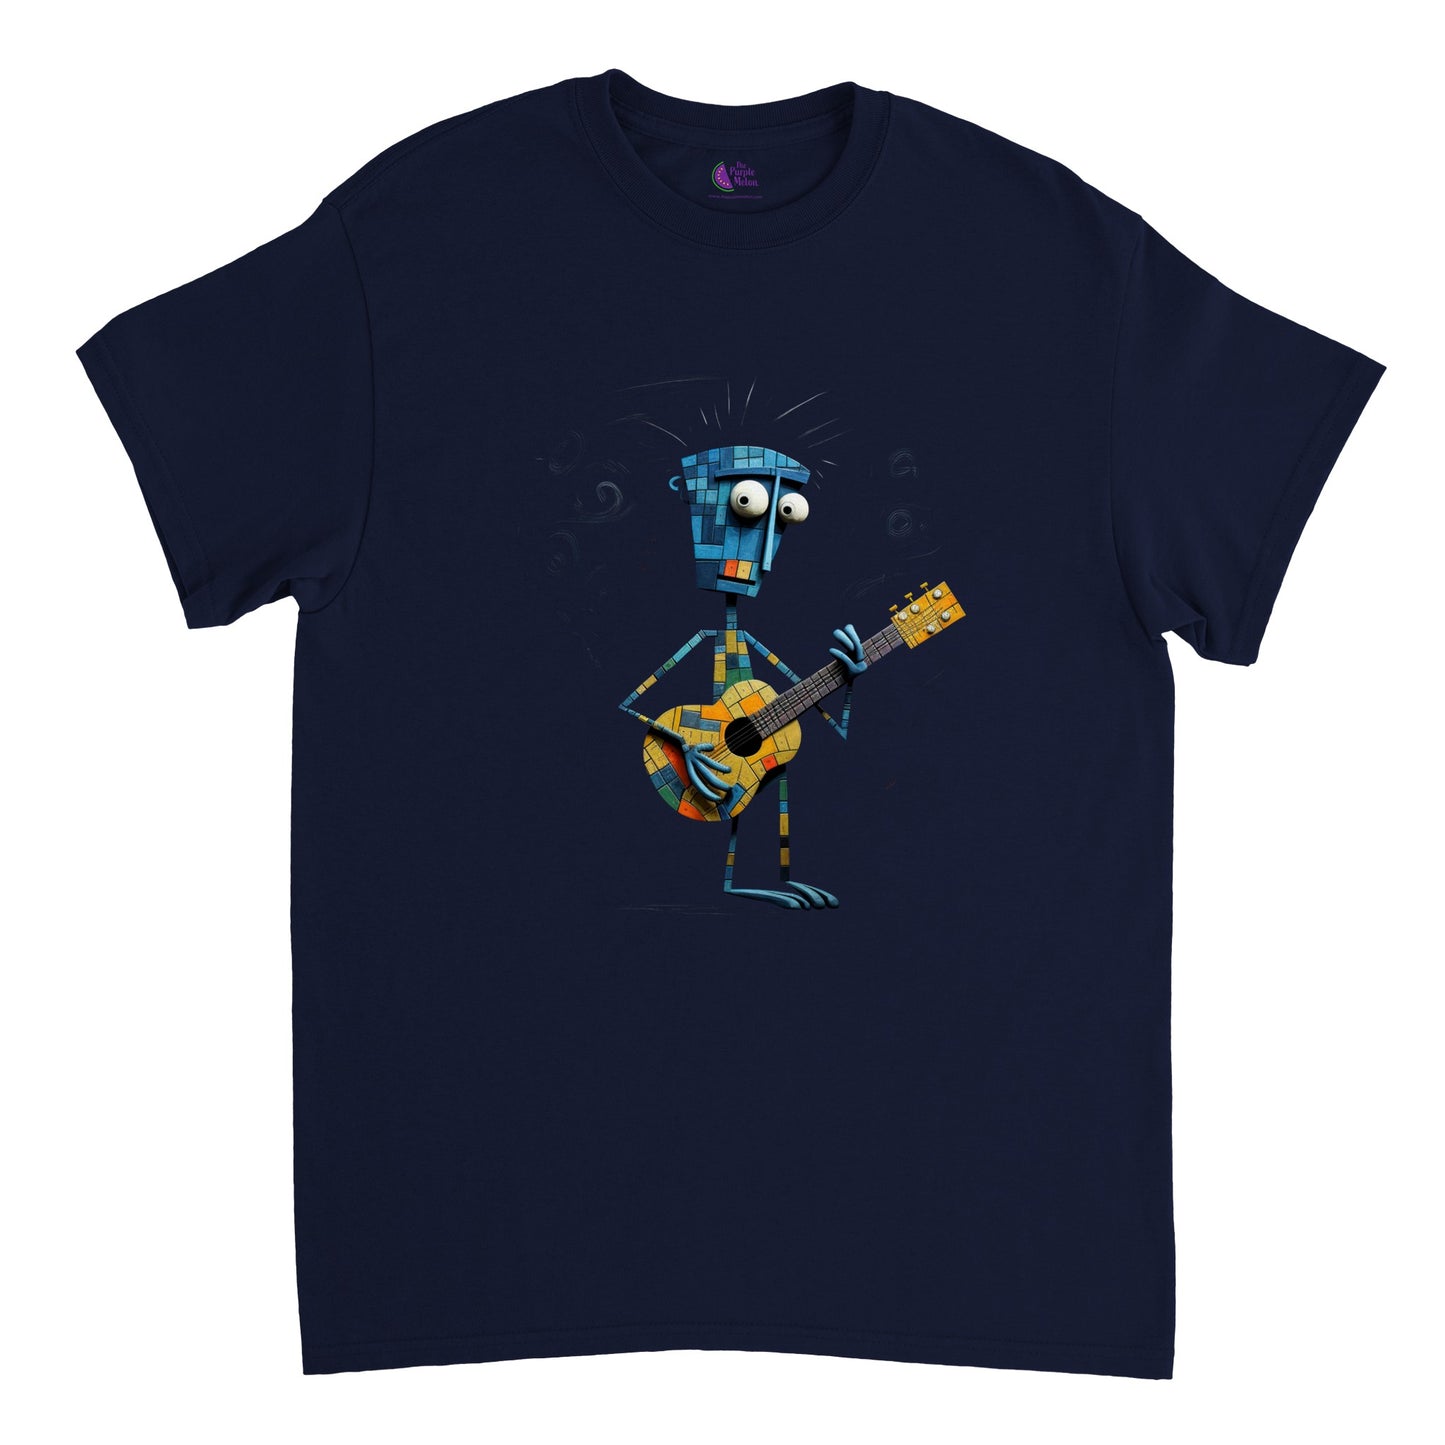 navy blue t-shirt with an abstract character playing guitar print